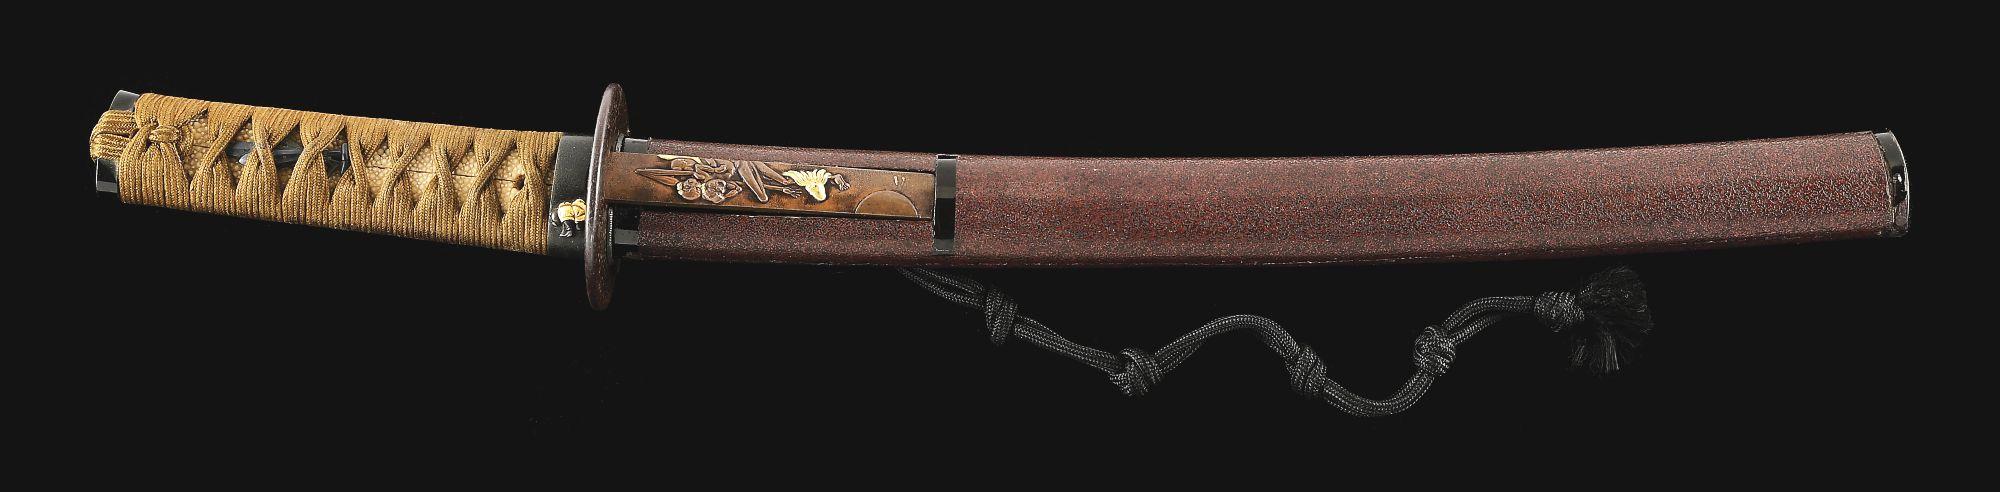 A LARGE TANTO SIGNED BY ECHIZEN KANETANE, WITH AN UNUSUAL INSCRIPTION REGARDING FORGING, IN KOSHIRAE